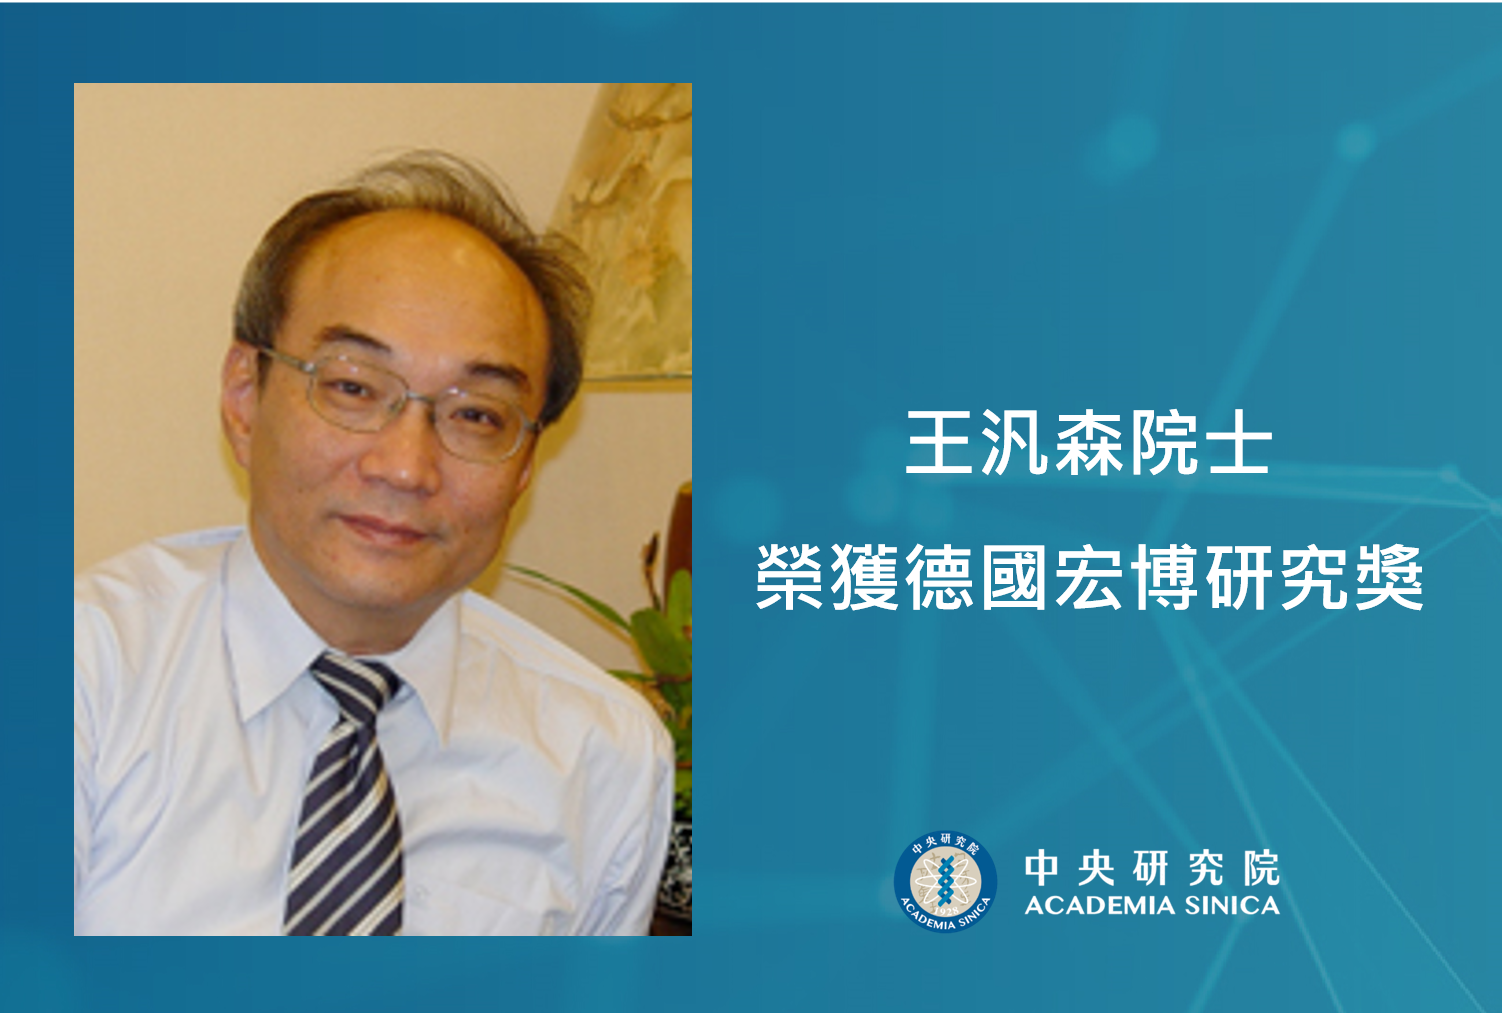 【Press Releases】Academia Sinica Academician Fan-sen Wang Receives the Humboldt Research Award from the Alexander von Humboldt Foundation in Germany